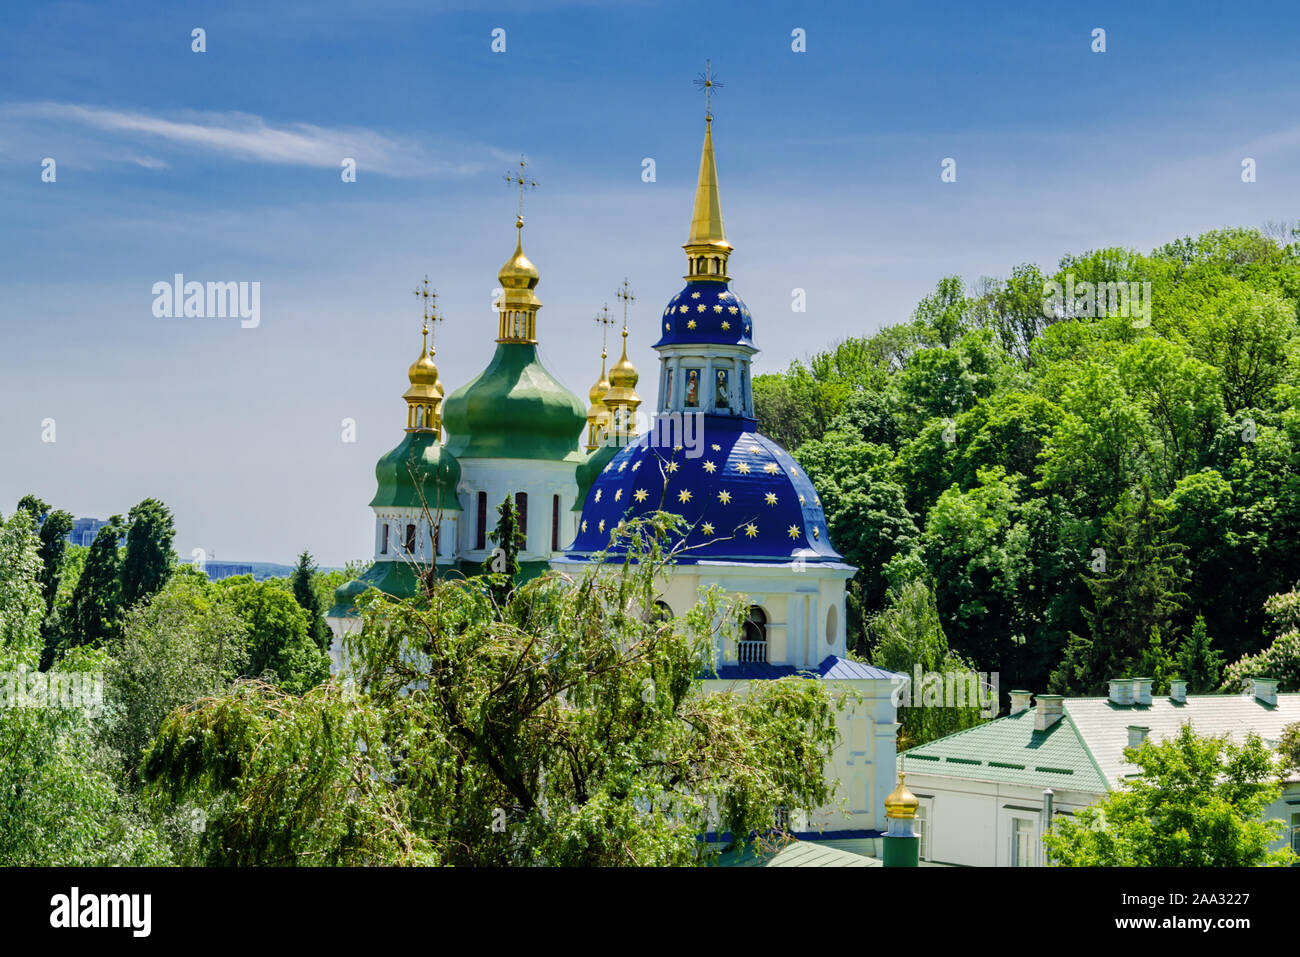 blue dome with a golden cross and golden stars, an Orthodox church in the botanical garden of Kiev, Ukraine, Stock Photo